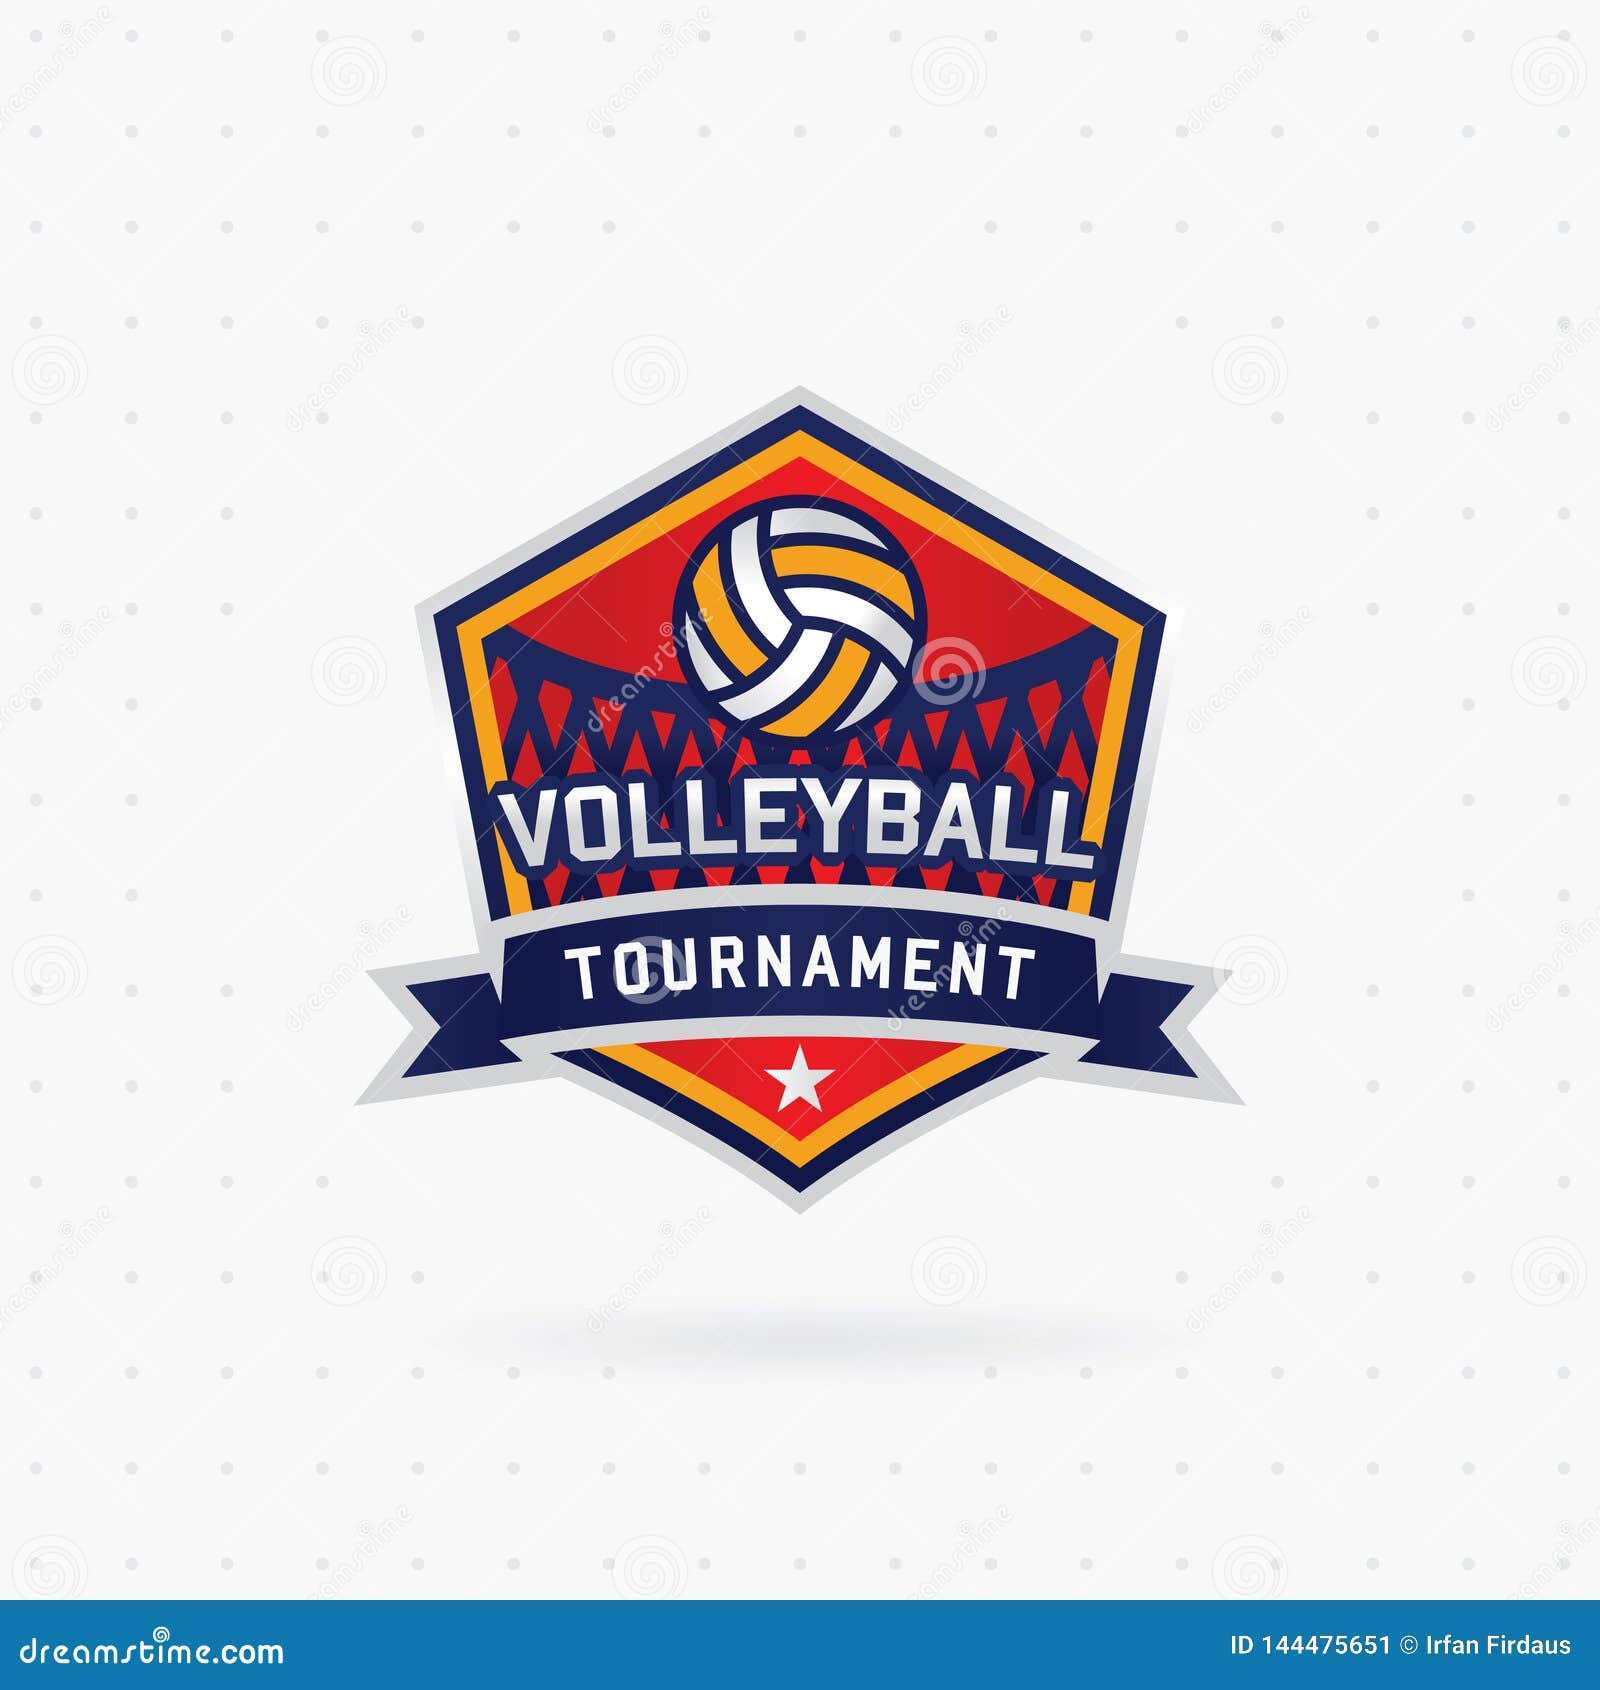 Volleyball tournament logo stock vector. Illustration of league - 144475651